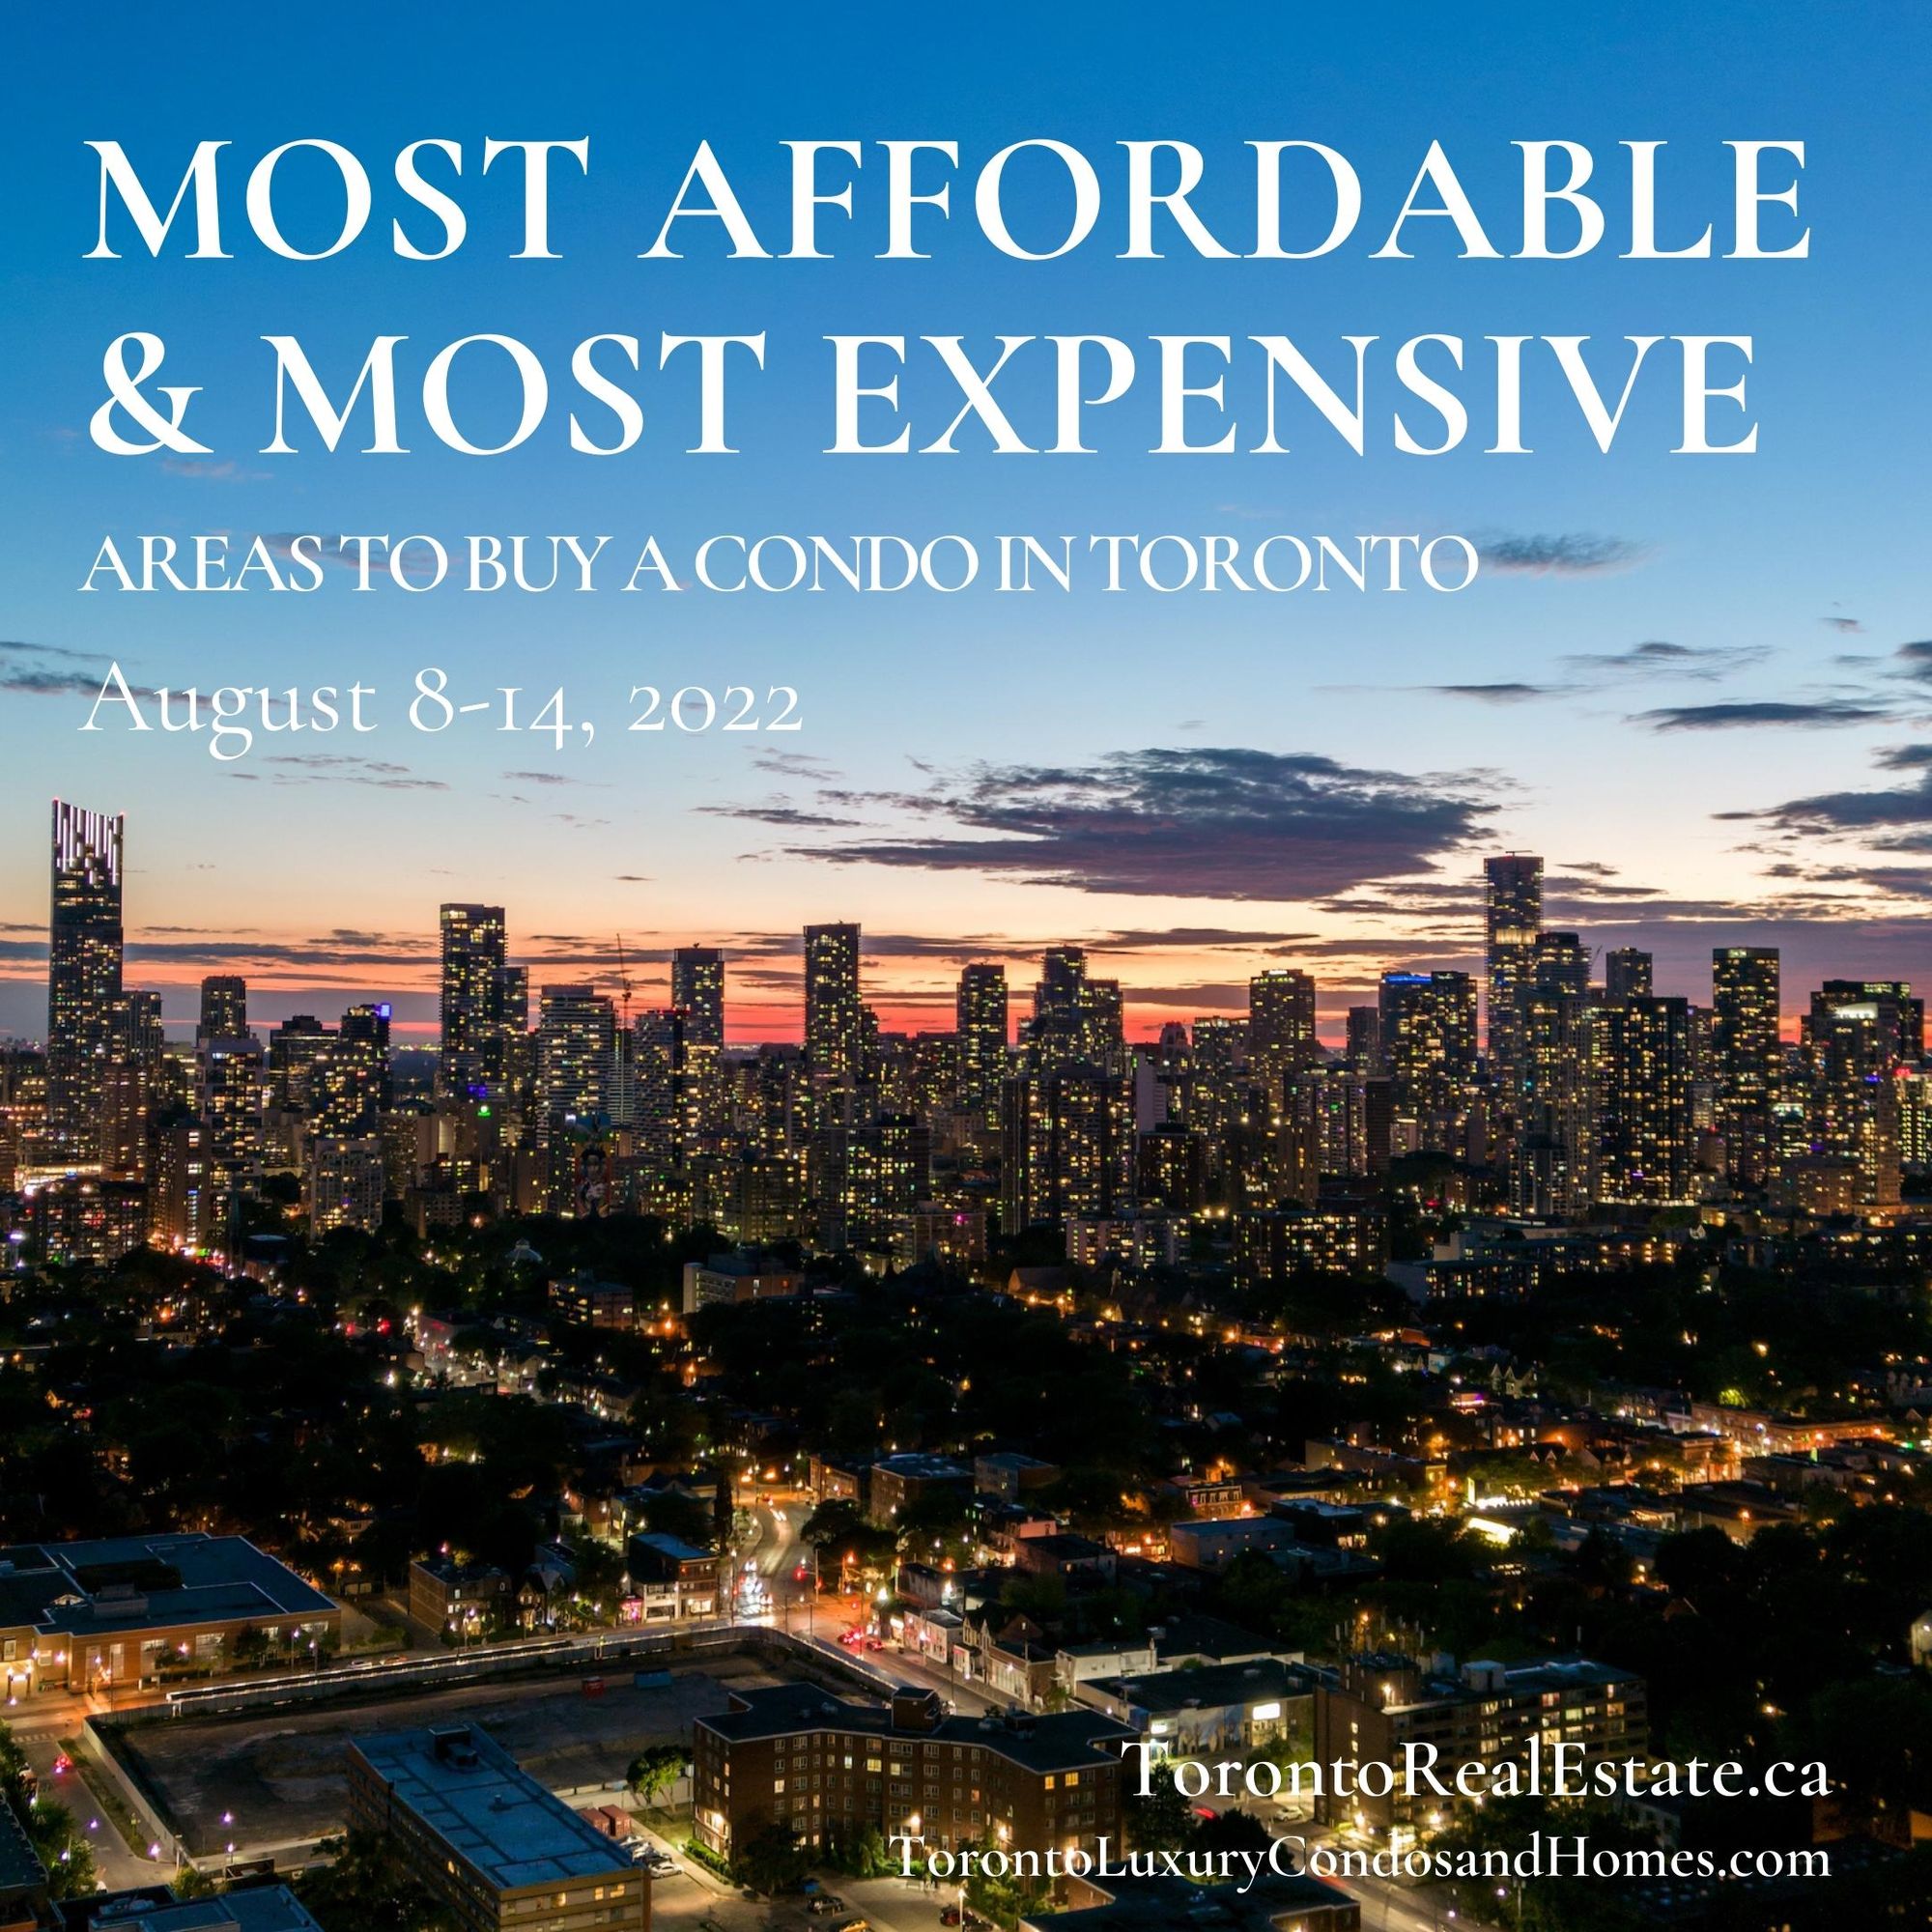 Most Affordable & Most Expensive Areas to Buy a Condo in Toronto | August 8-14, 2022